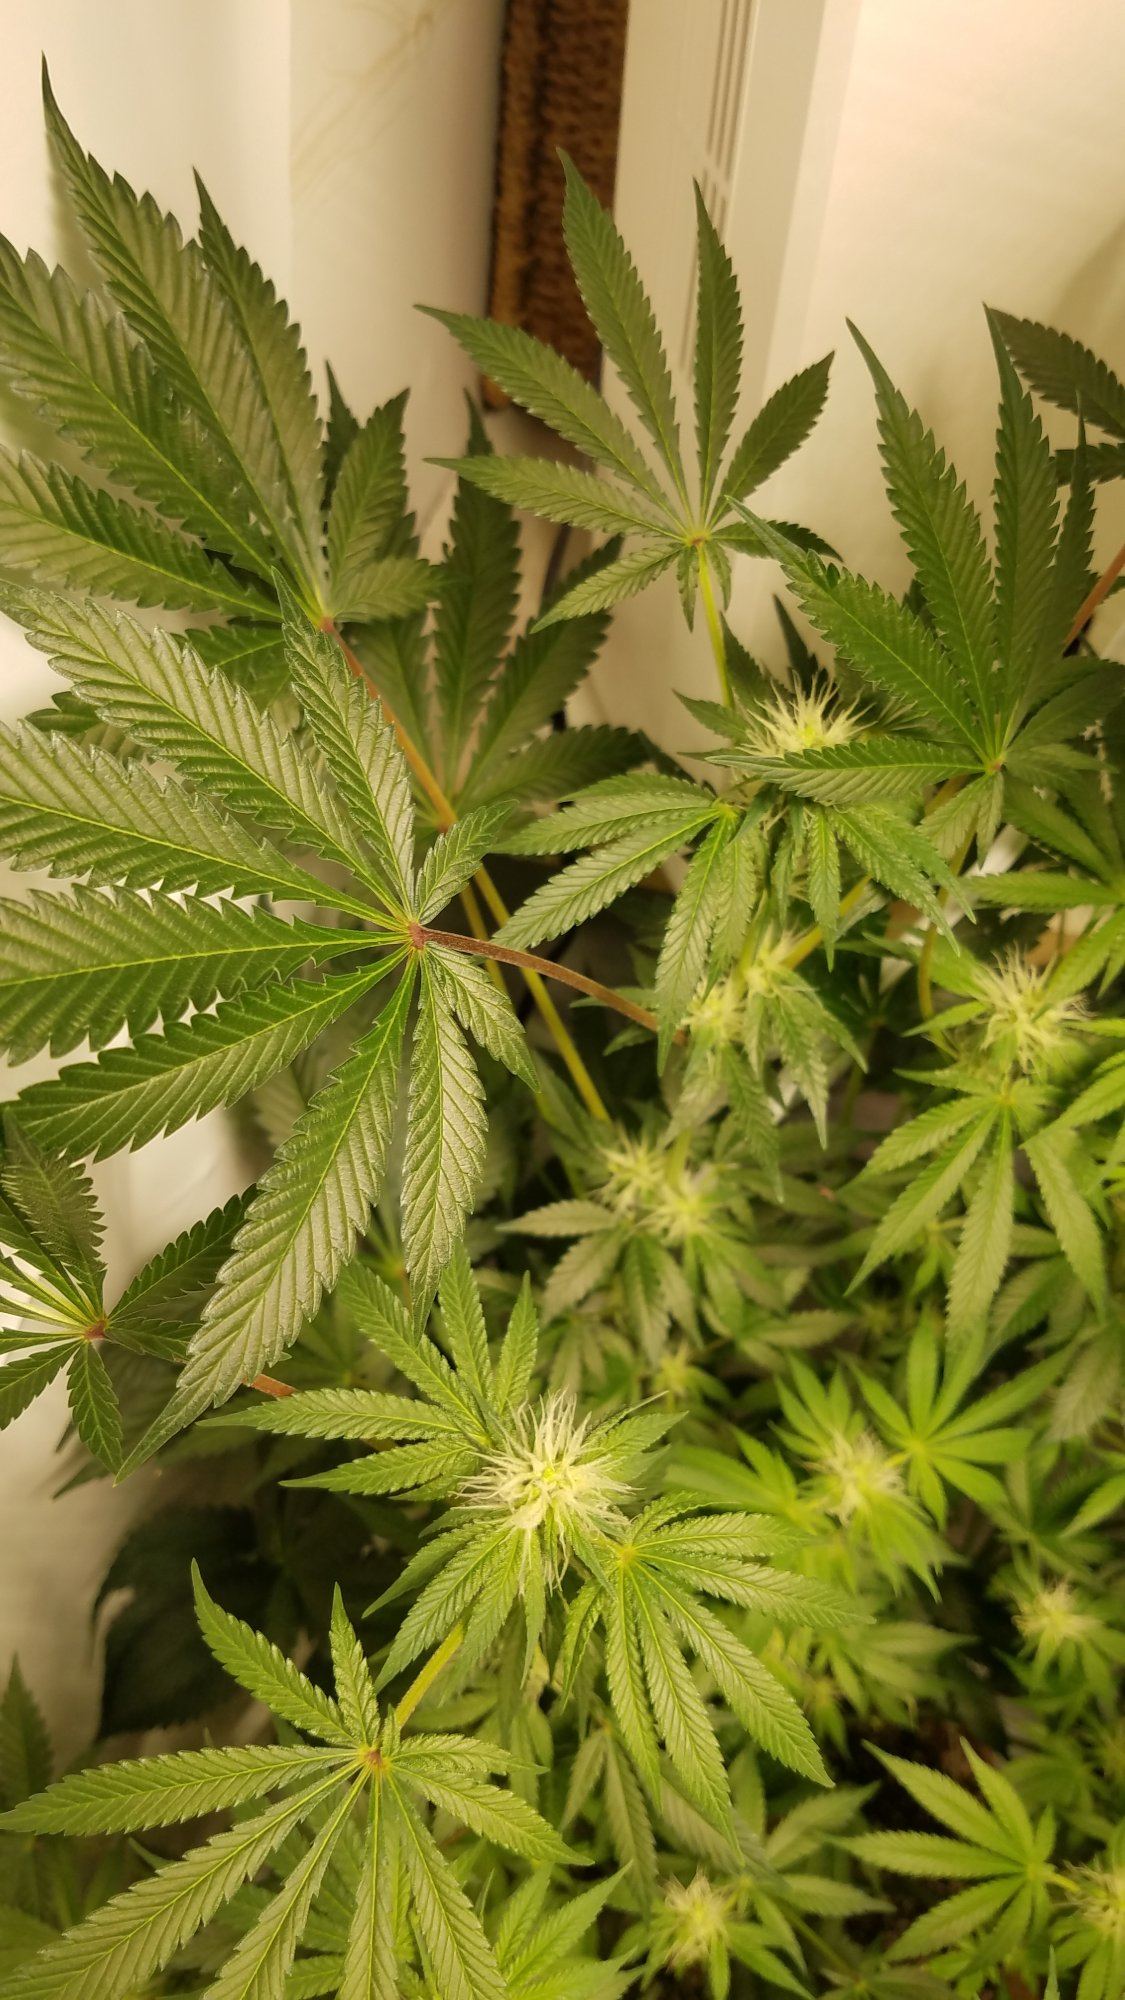 Brand new grower lack or burn